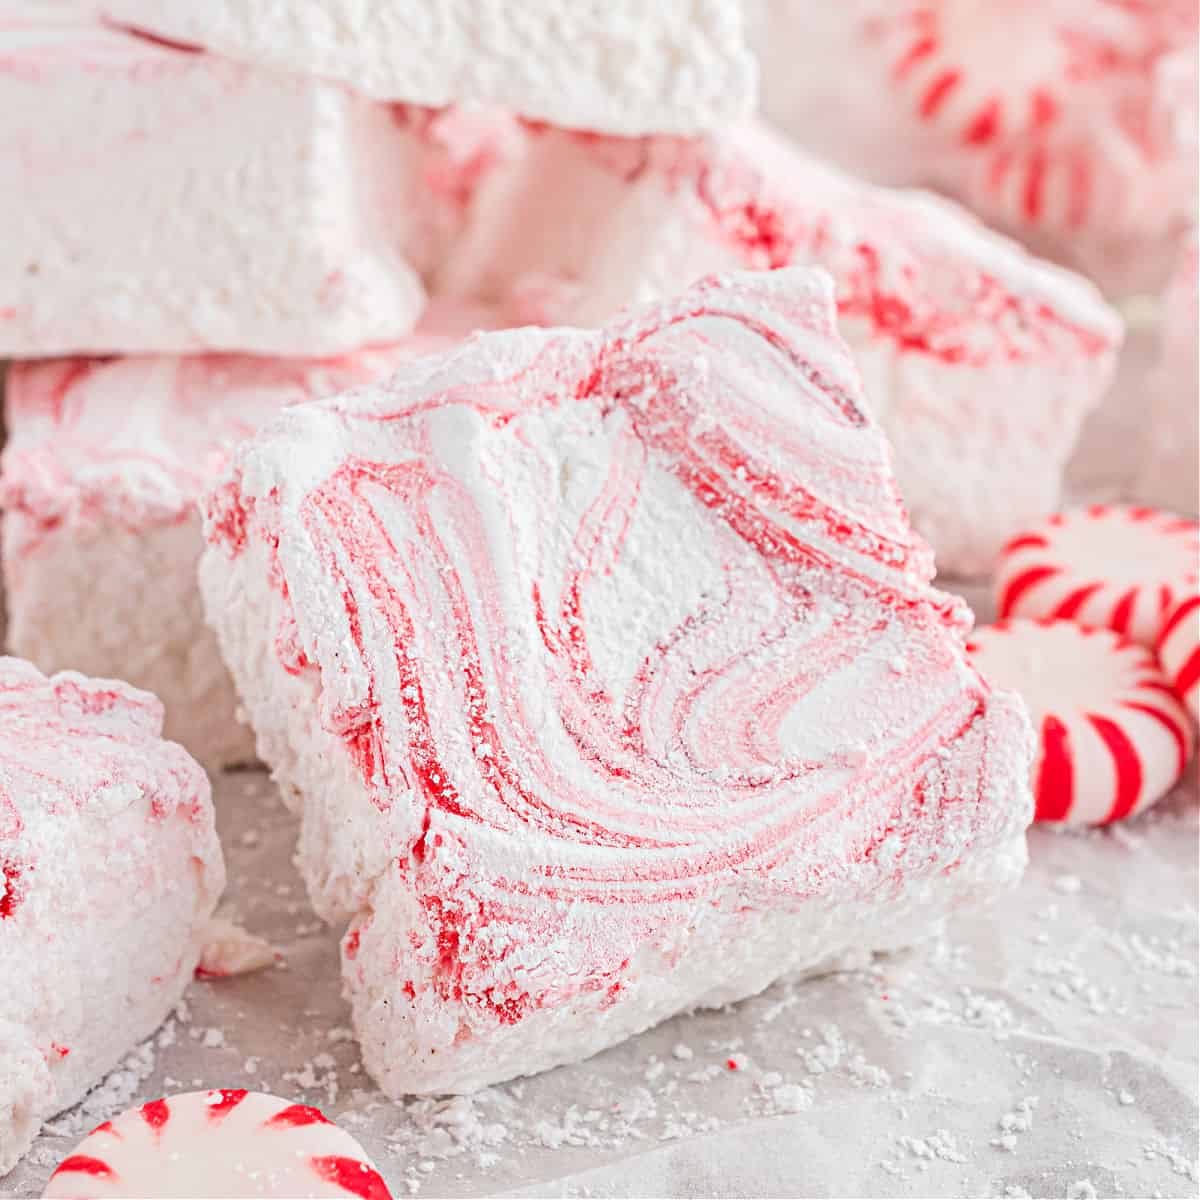 Homemade Peppermint Marshmallows - The Perfect Hot Cocoa Stirrers